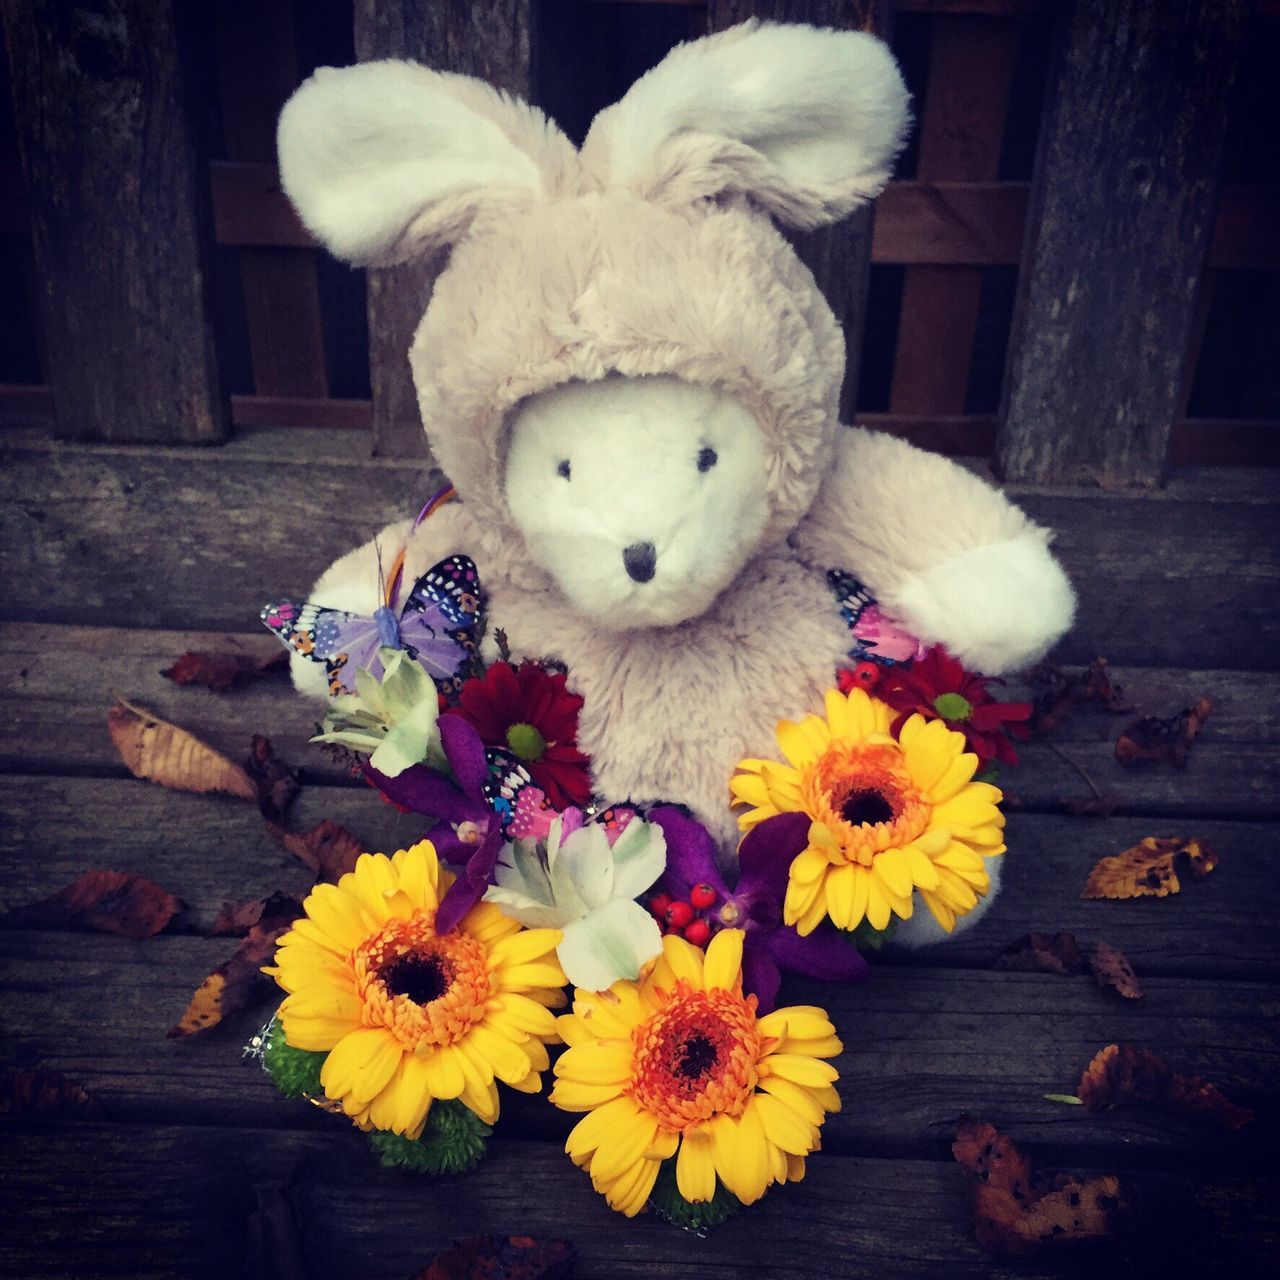 teddy bear, stuffed toy, animal representation, toy, childhood, toy animal, easter bunny, no people, flower, nature, close-up, outdoors, day